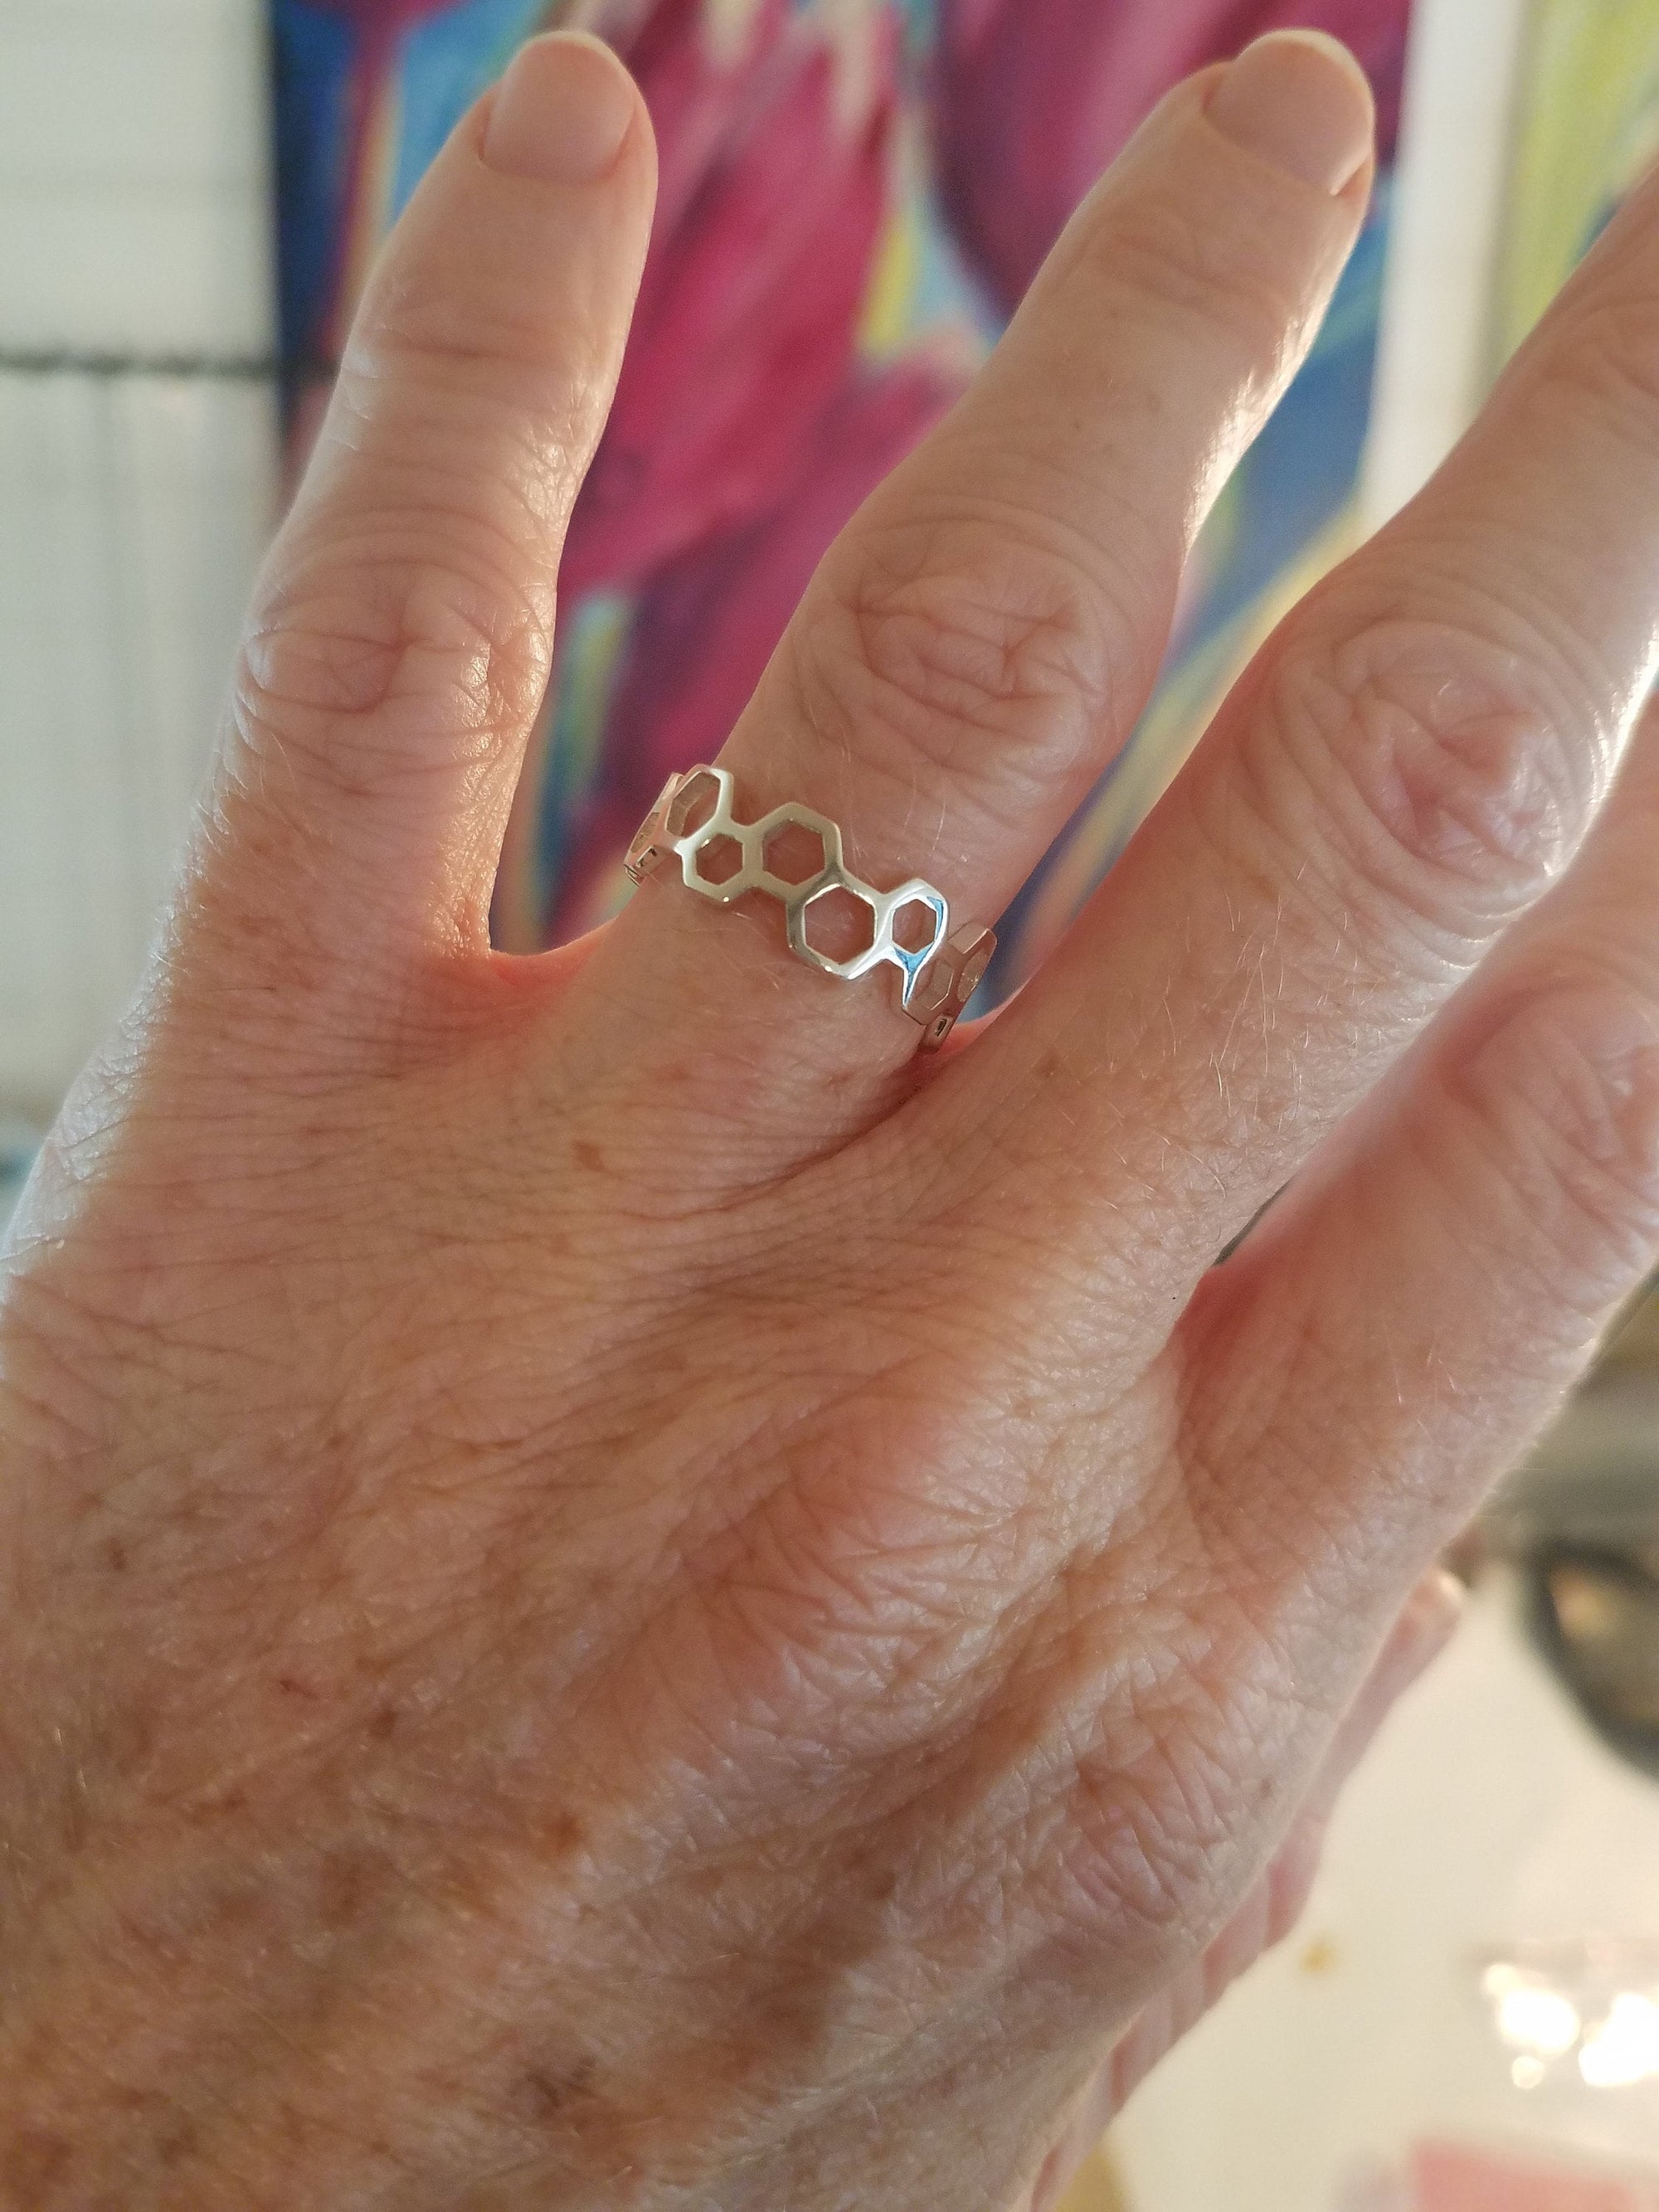 Honeycomb Jewelry, Save The Bees Tribute, Sterling Silver Honeycomb Ring, Unisex Geometric Jewelry Ring in 3 Sizes, Unique Bee Keeper Gifts